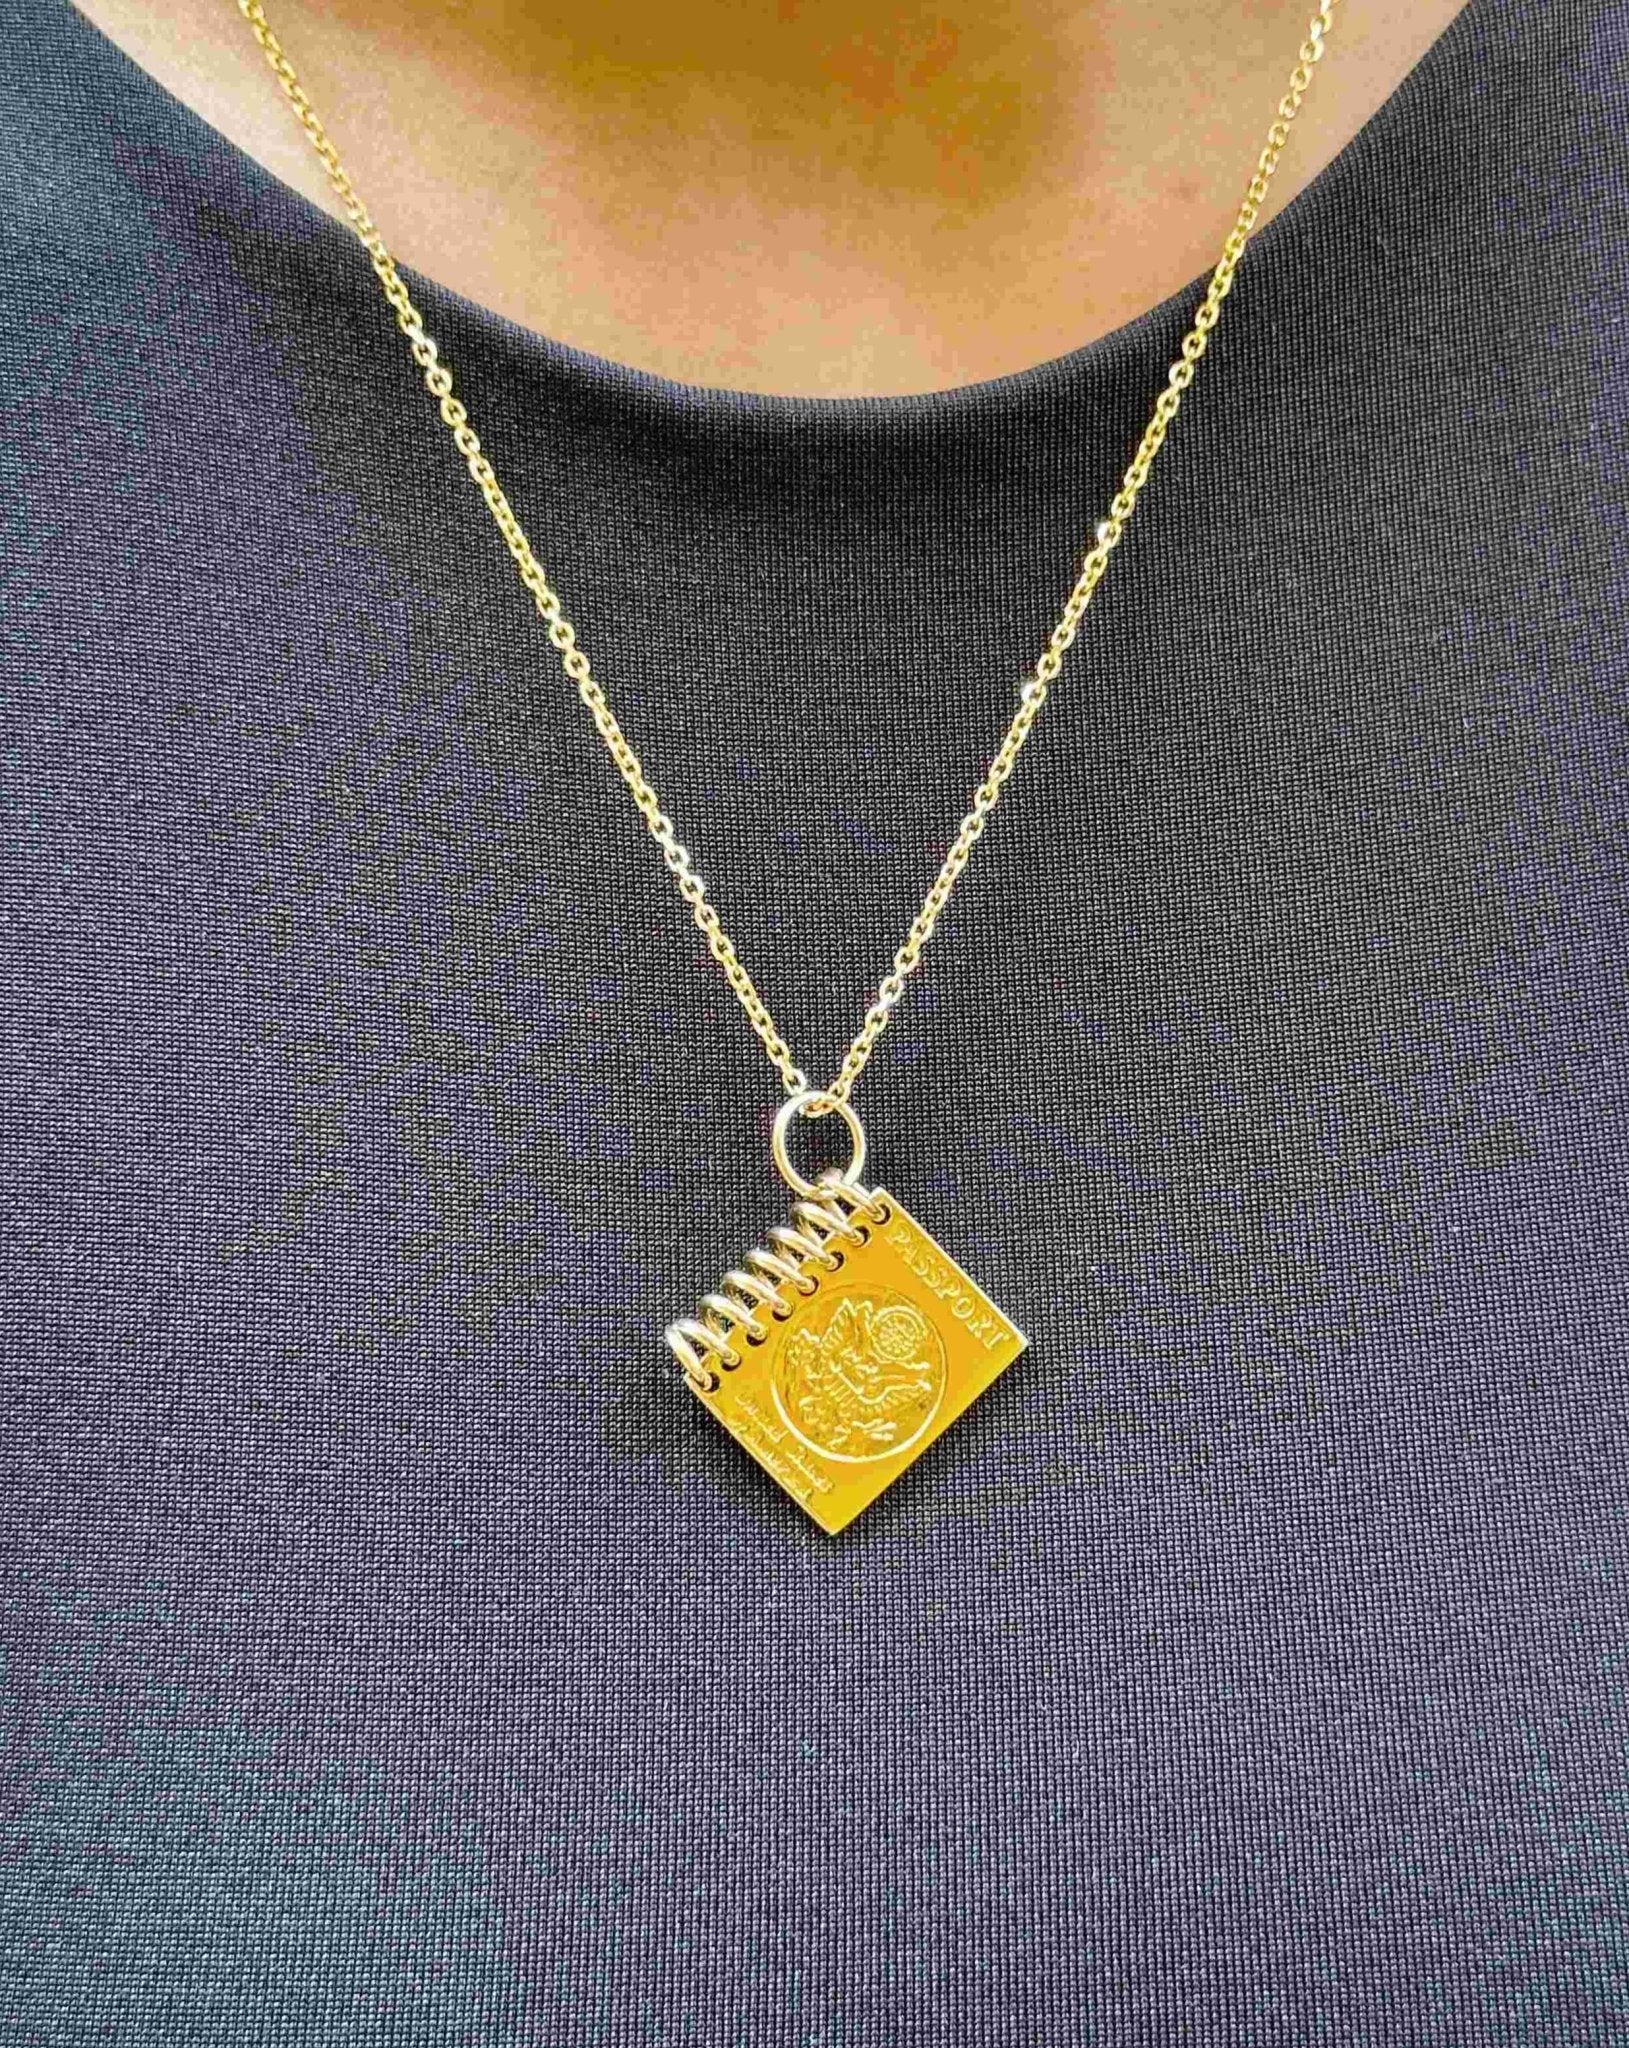 Solid Gold USA Passport Necklace Charm - Sparkle Society